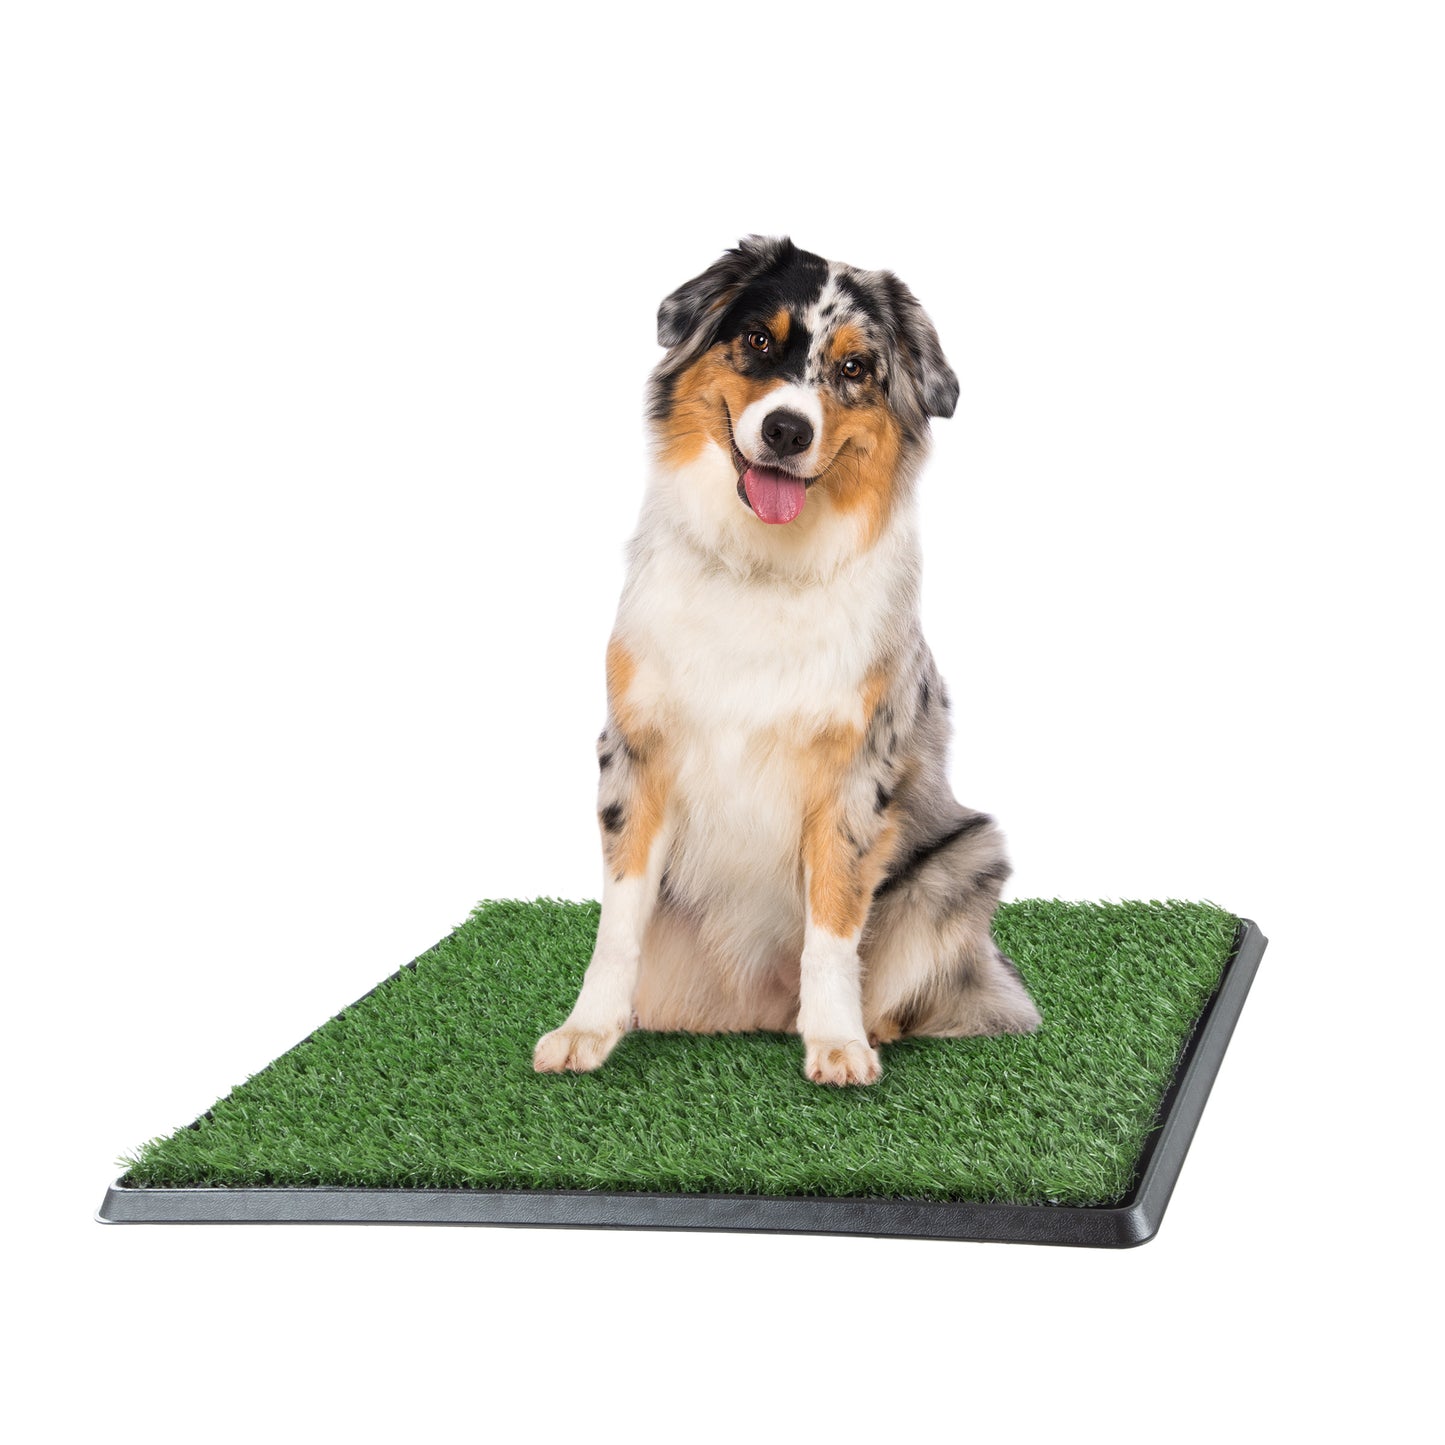 Set of 3 Replacement Turf Grass Pee Pads